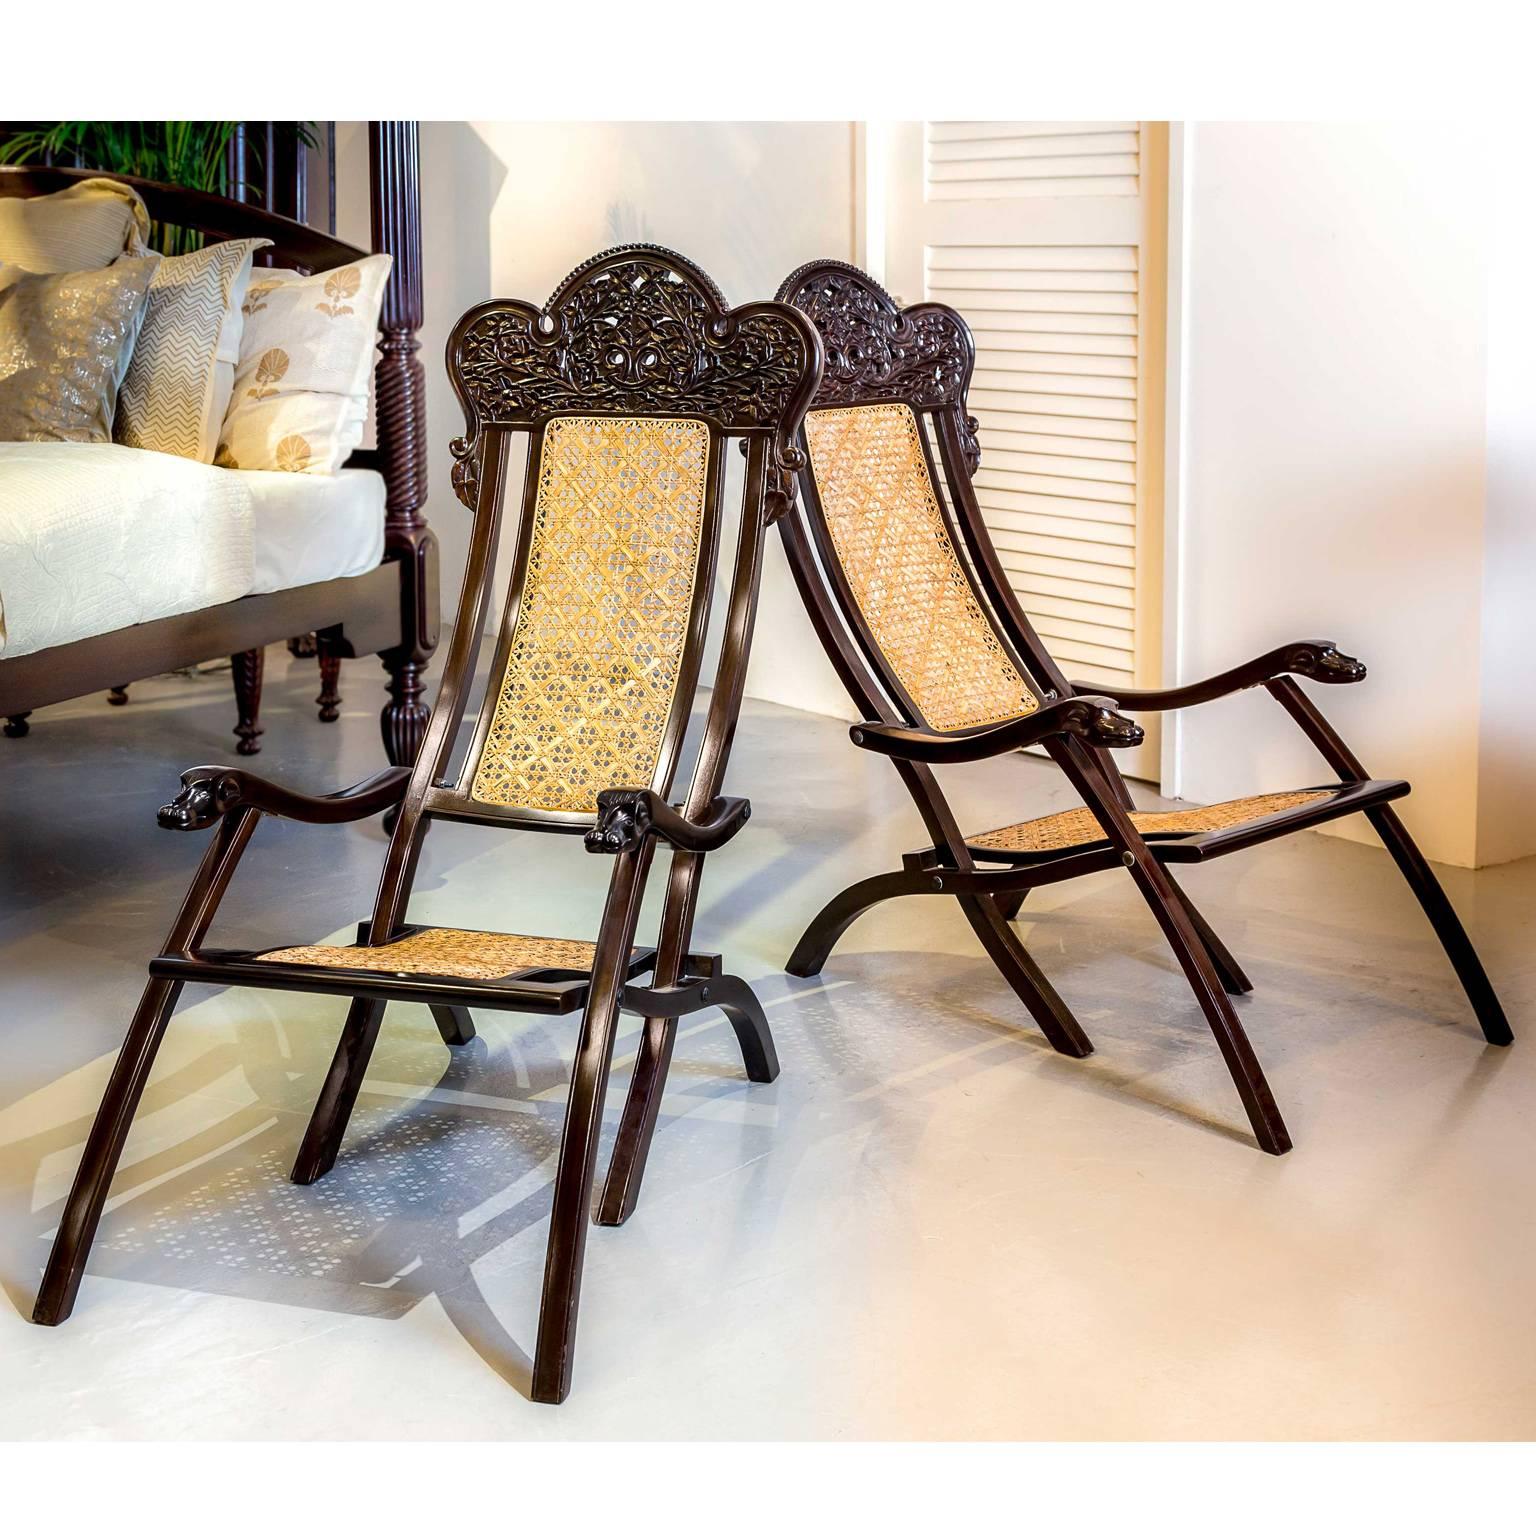 A pair of Portuguese colonial rosewood folding chairs. Each chair is composed of three components joined with steel screws; the back, the seat and arms, each extends down to form one of the three pairs of legs. 
The back is concave with a carved